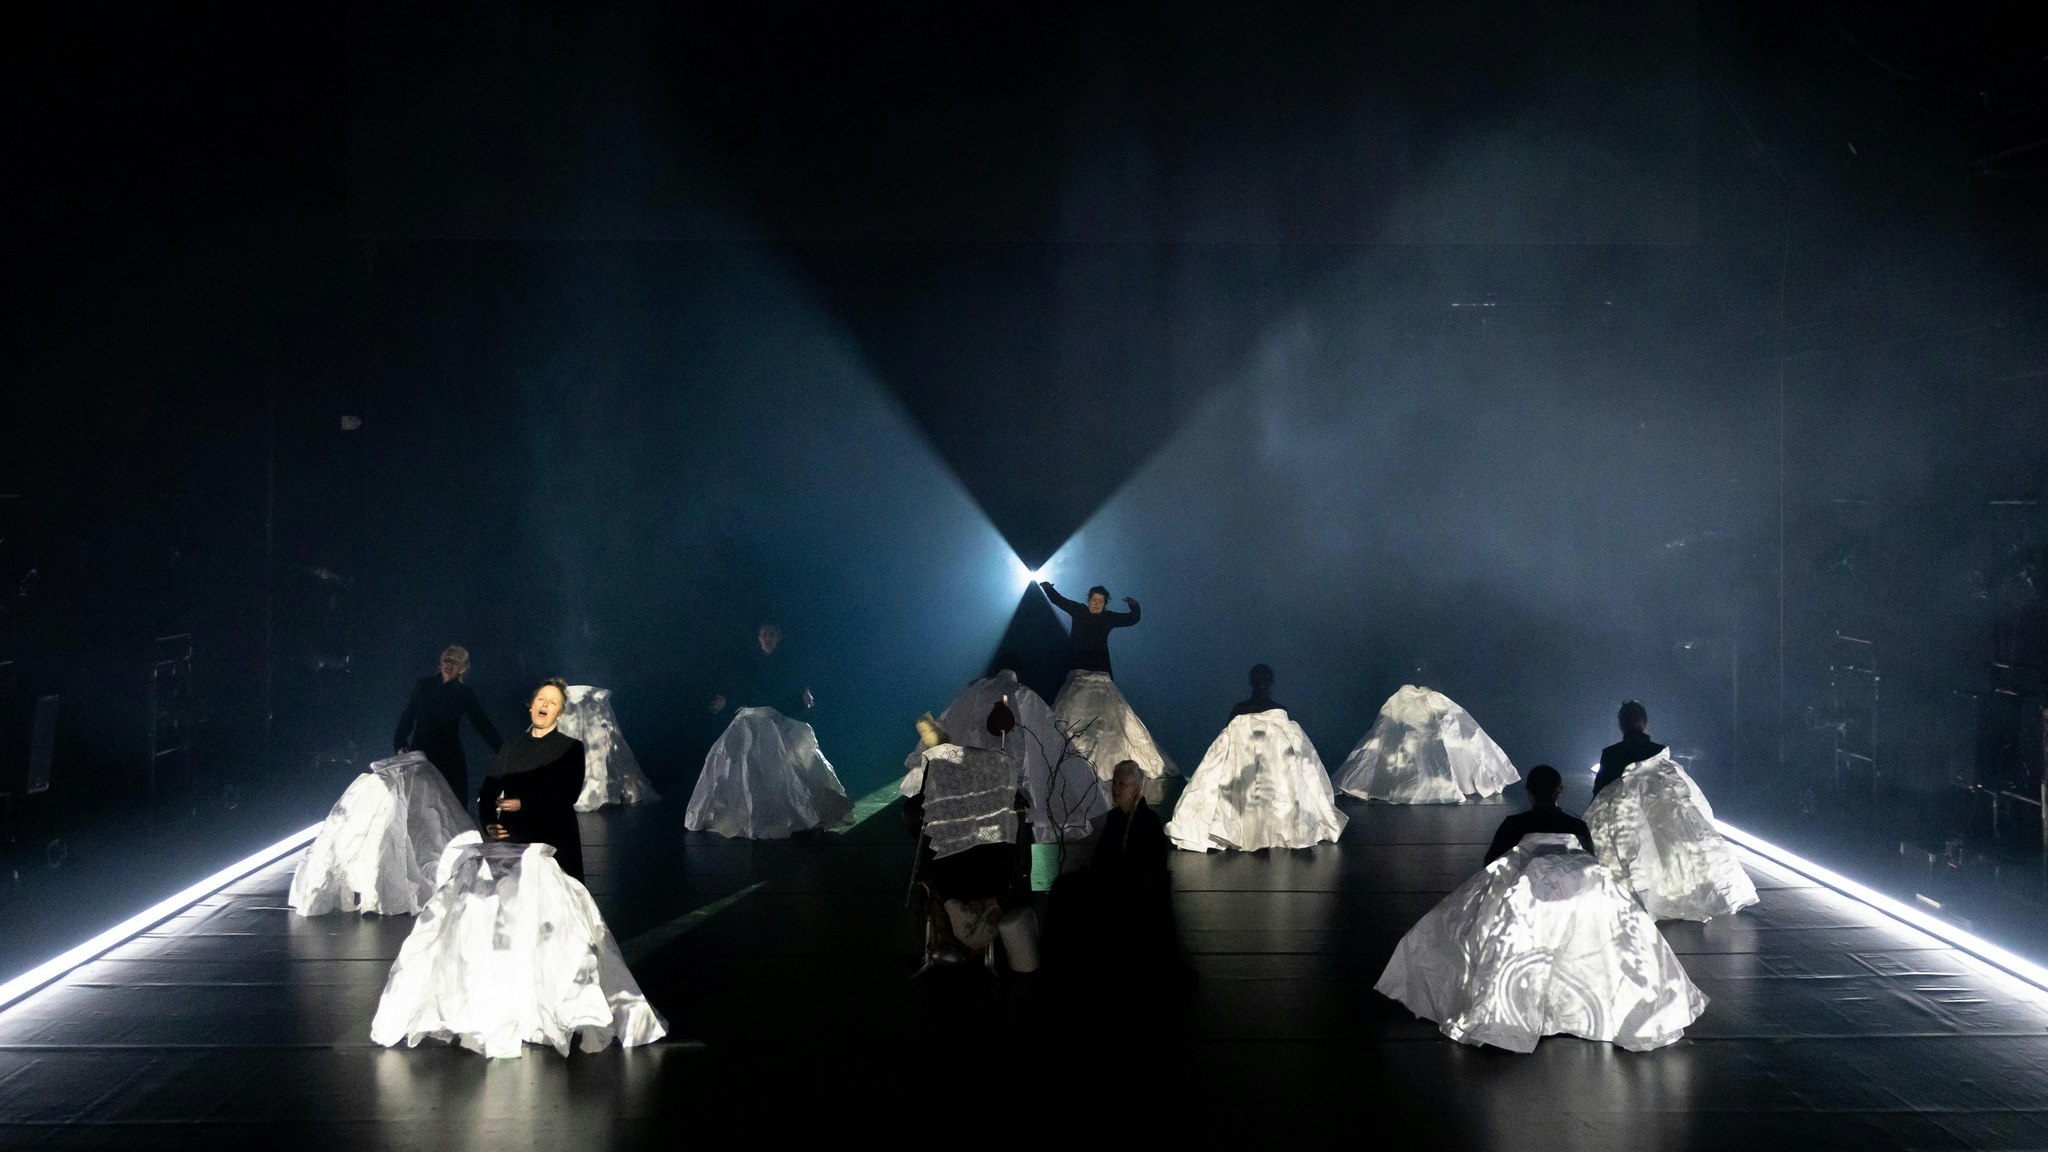 Several women wearing black perform behind giant paper ball skirts on a dramatically lit stage.